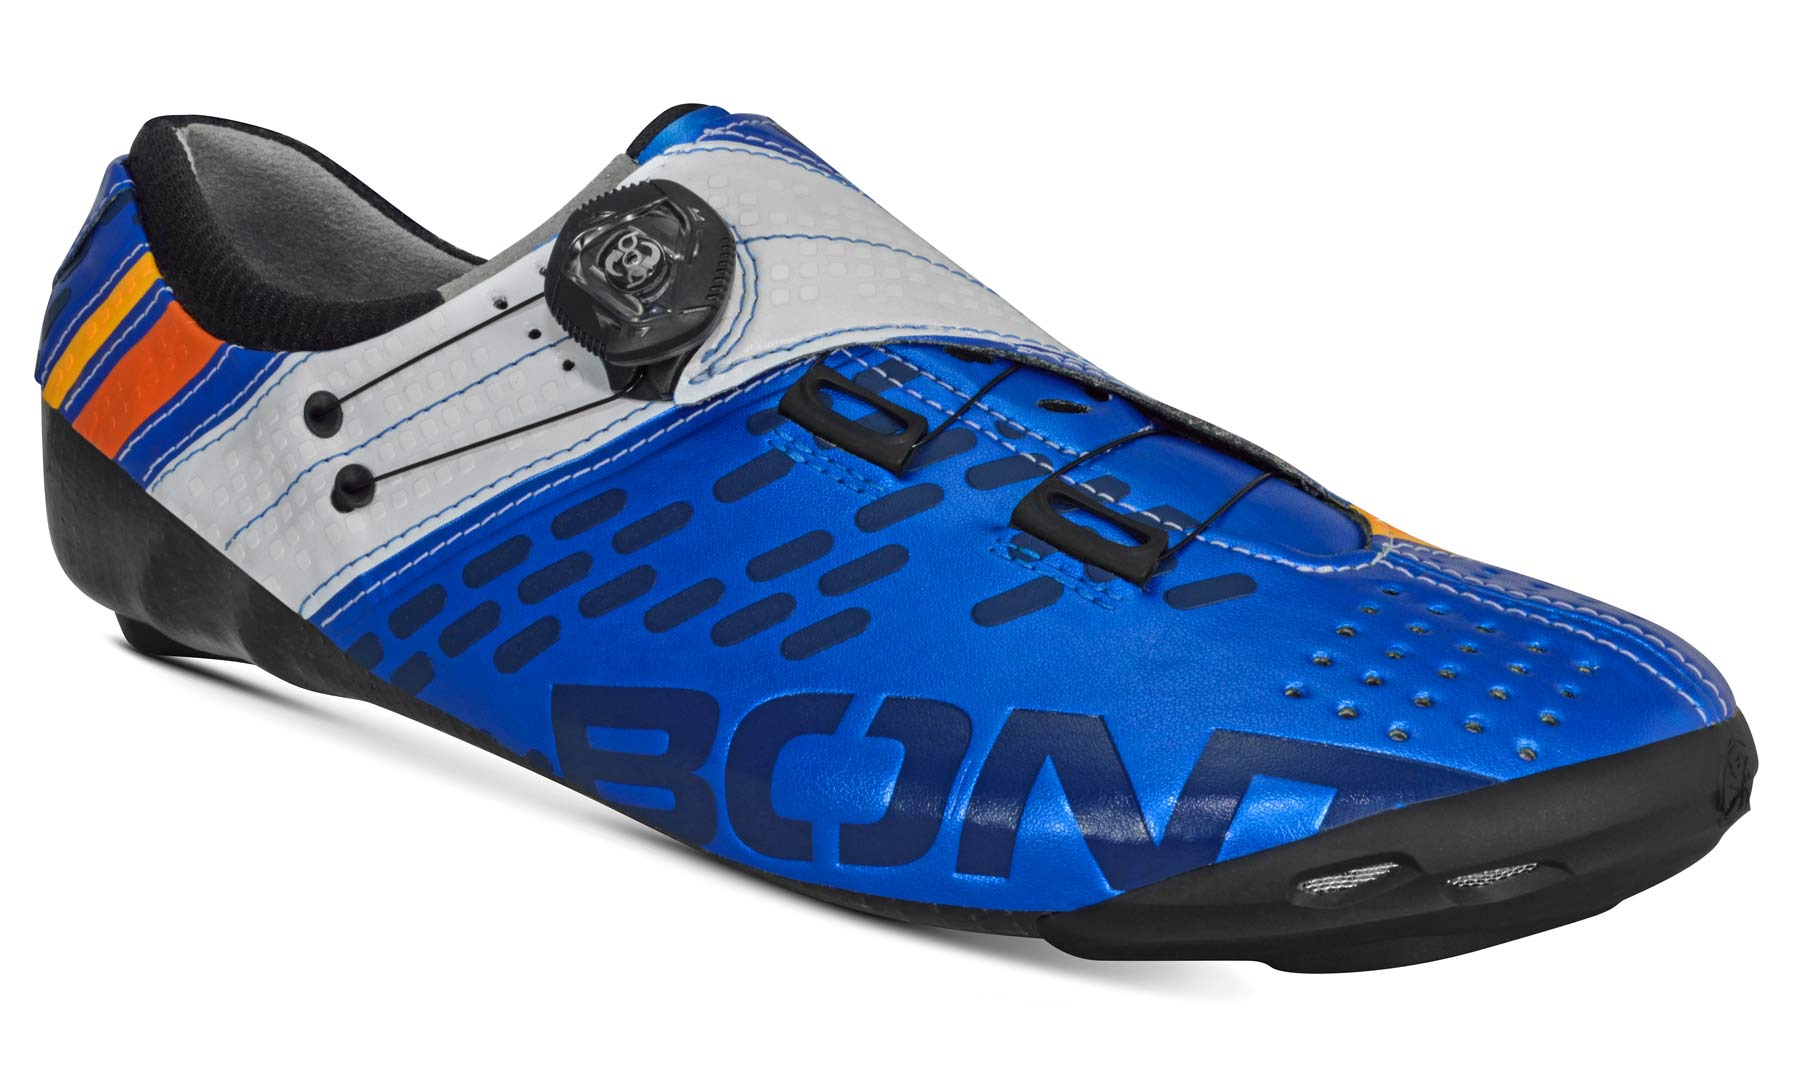 Bont dials up new Helix road shoes with 